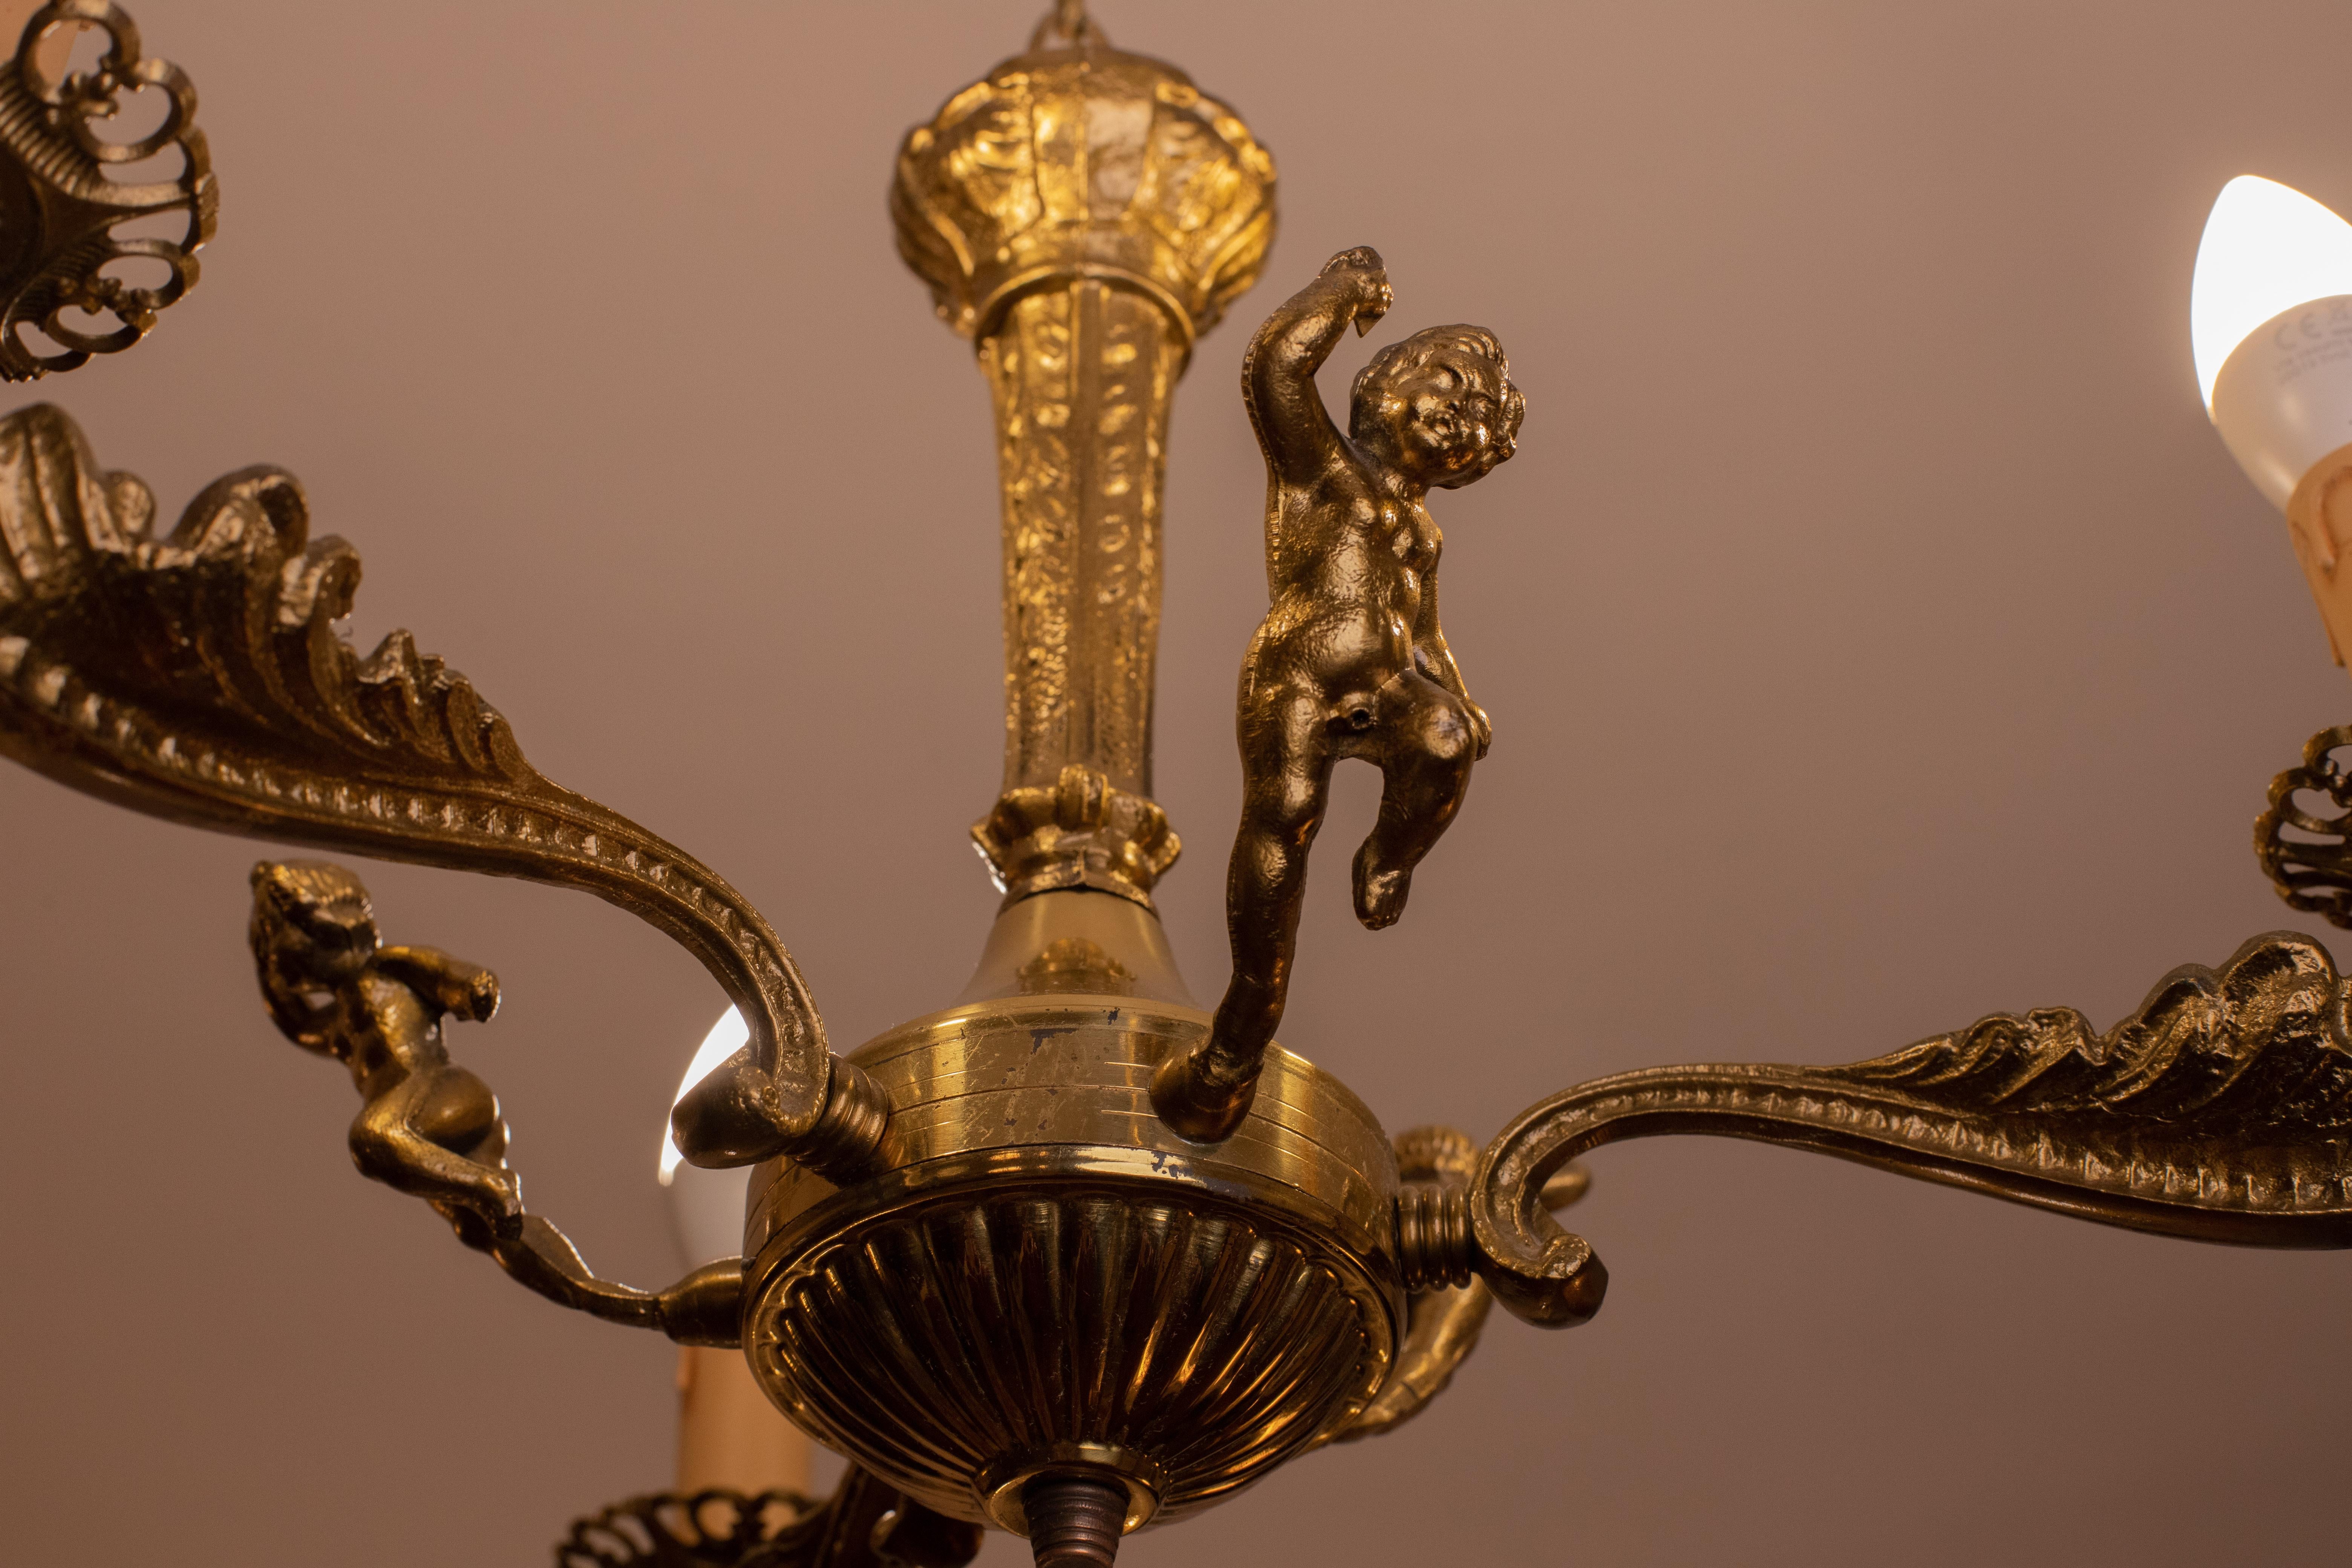 Pretty three-light brass chandelier in Baroque style with three elements depicting a child.
One of the three children (visible in photo) has missing pubis, not visible at all.
The chandelier has 3 arms that mount 3 e14 bulbs, European